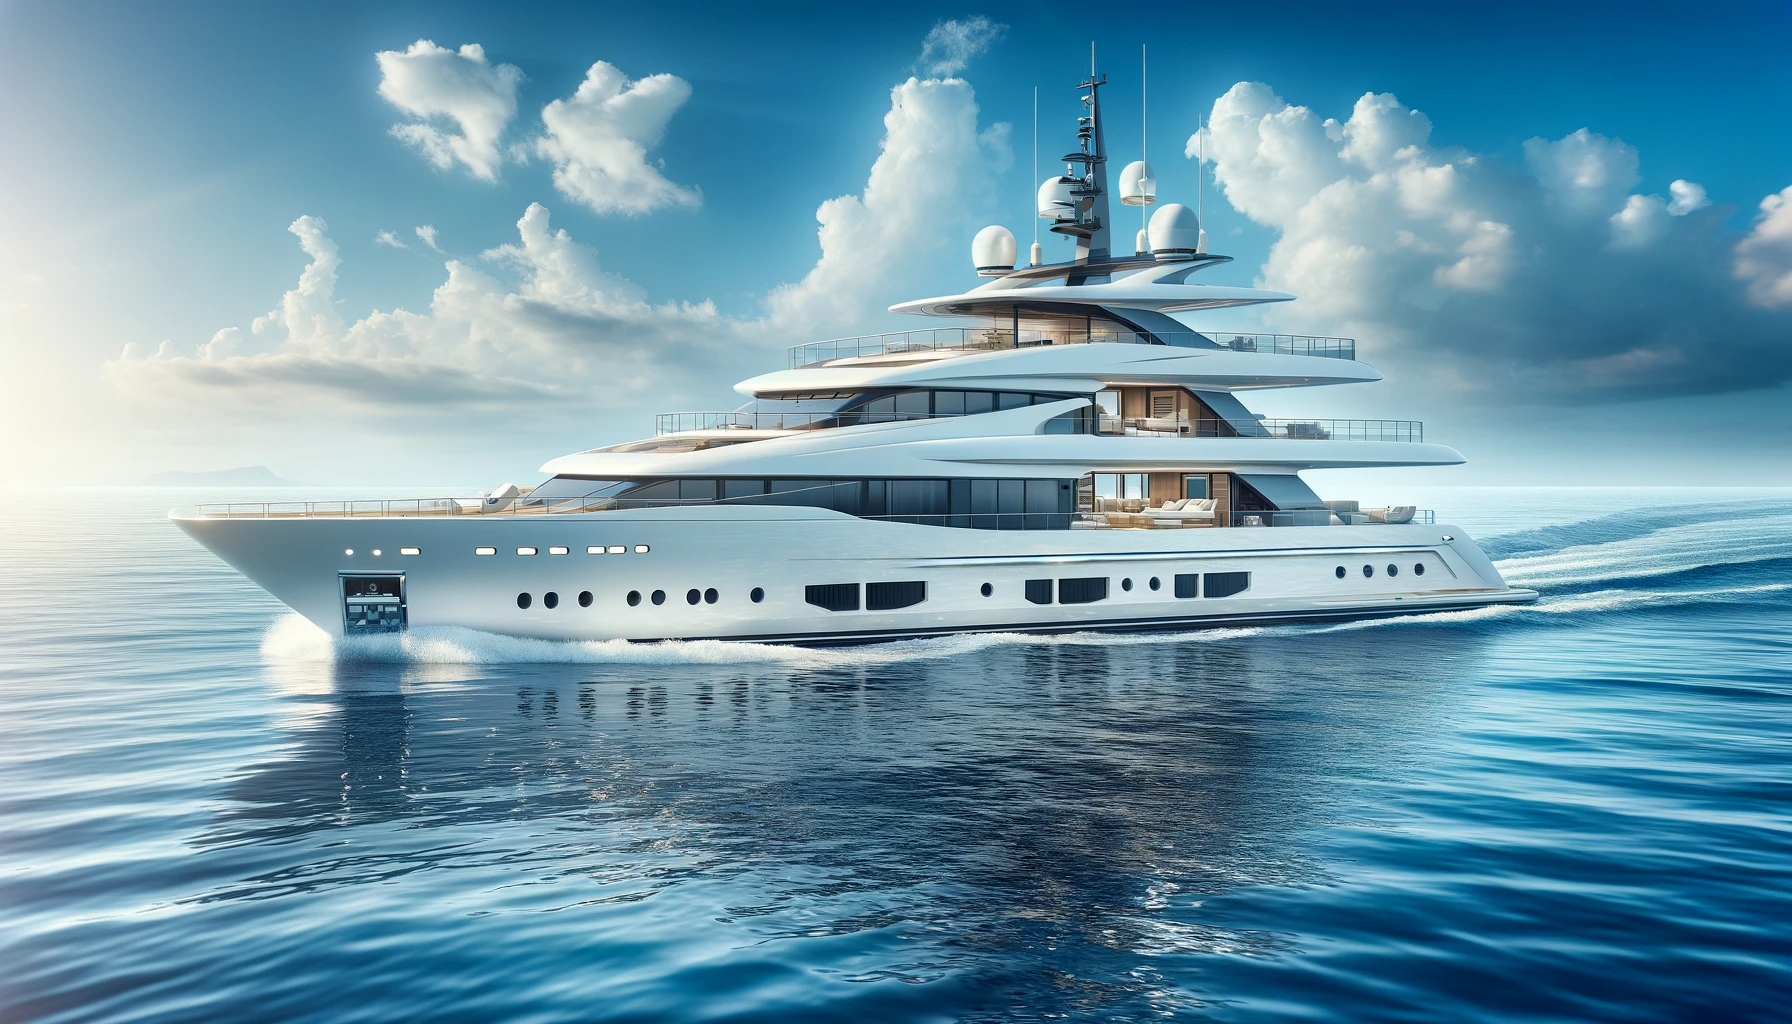 files/DALL_E_2024-01-06_10.09.48_-_A_modern_luxurious_yacht_gliding_over_the_calm_blue_ocean_under_a_bright_sunny_sky._The_yacht_is_sleek_and_white_featuring_multiple_decks_with_com.png